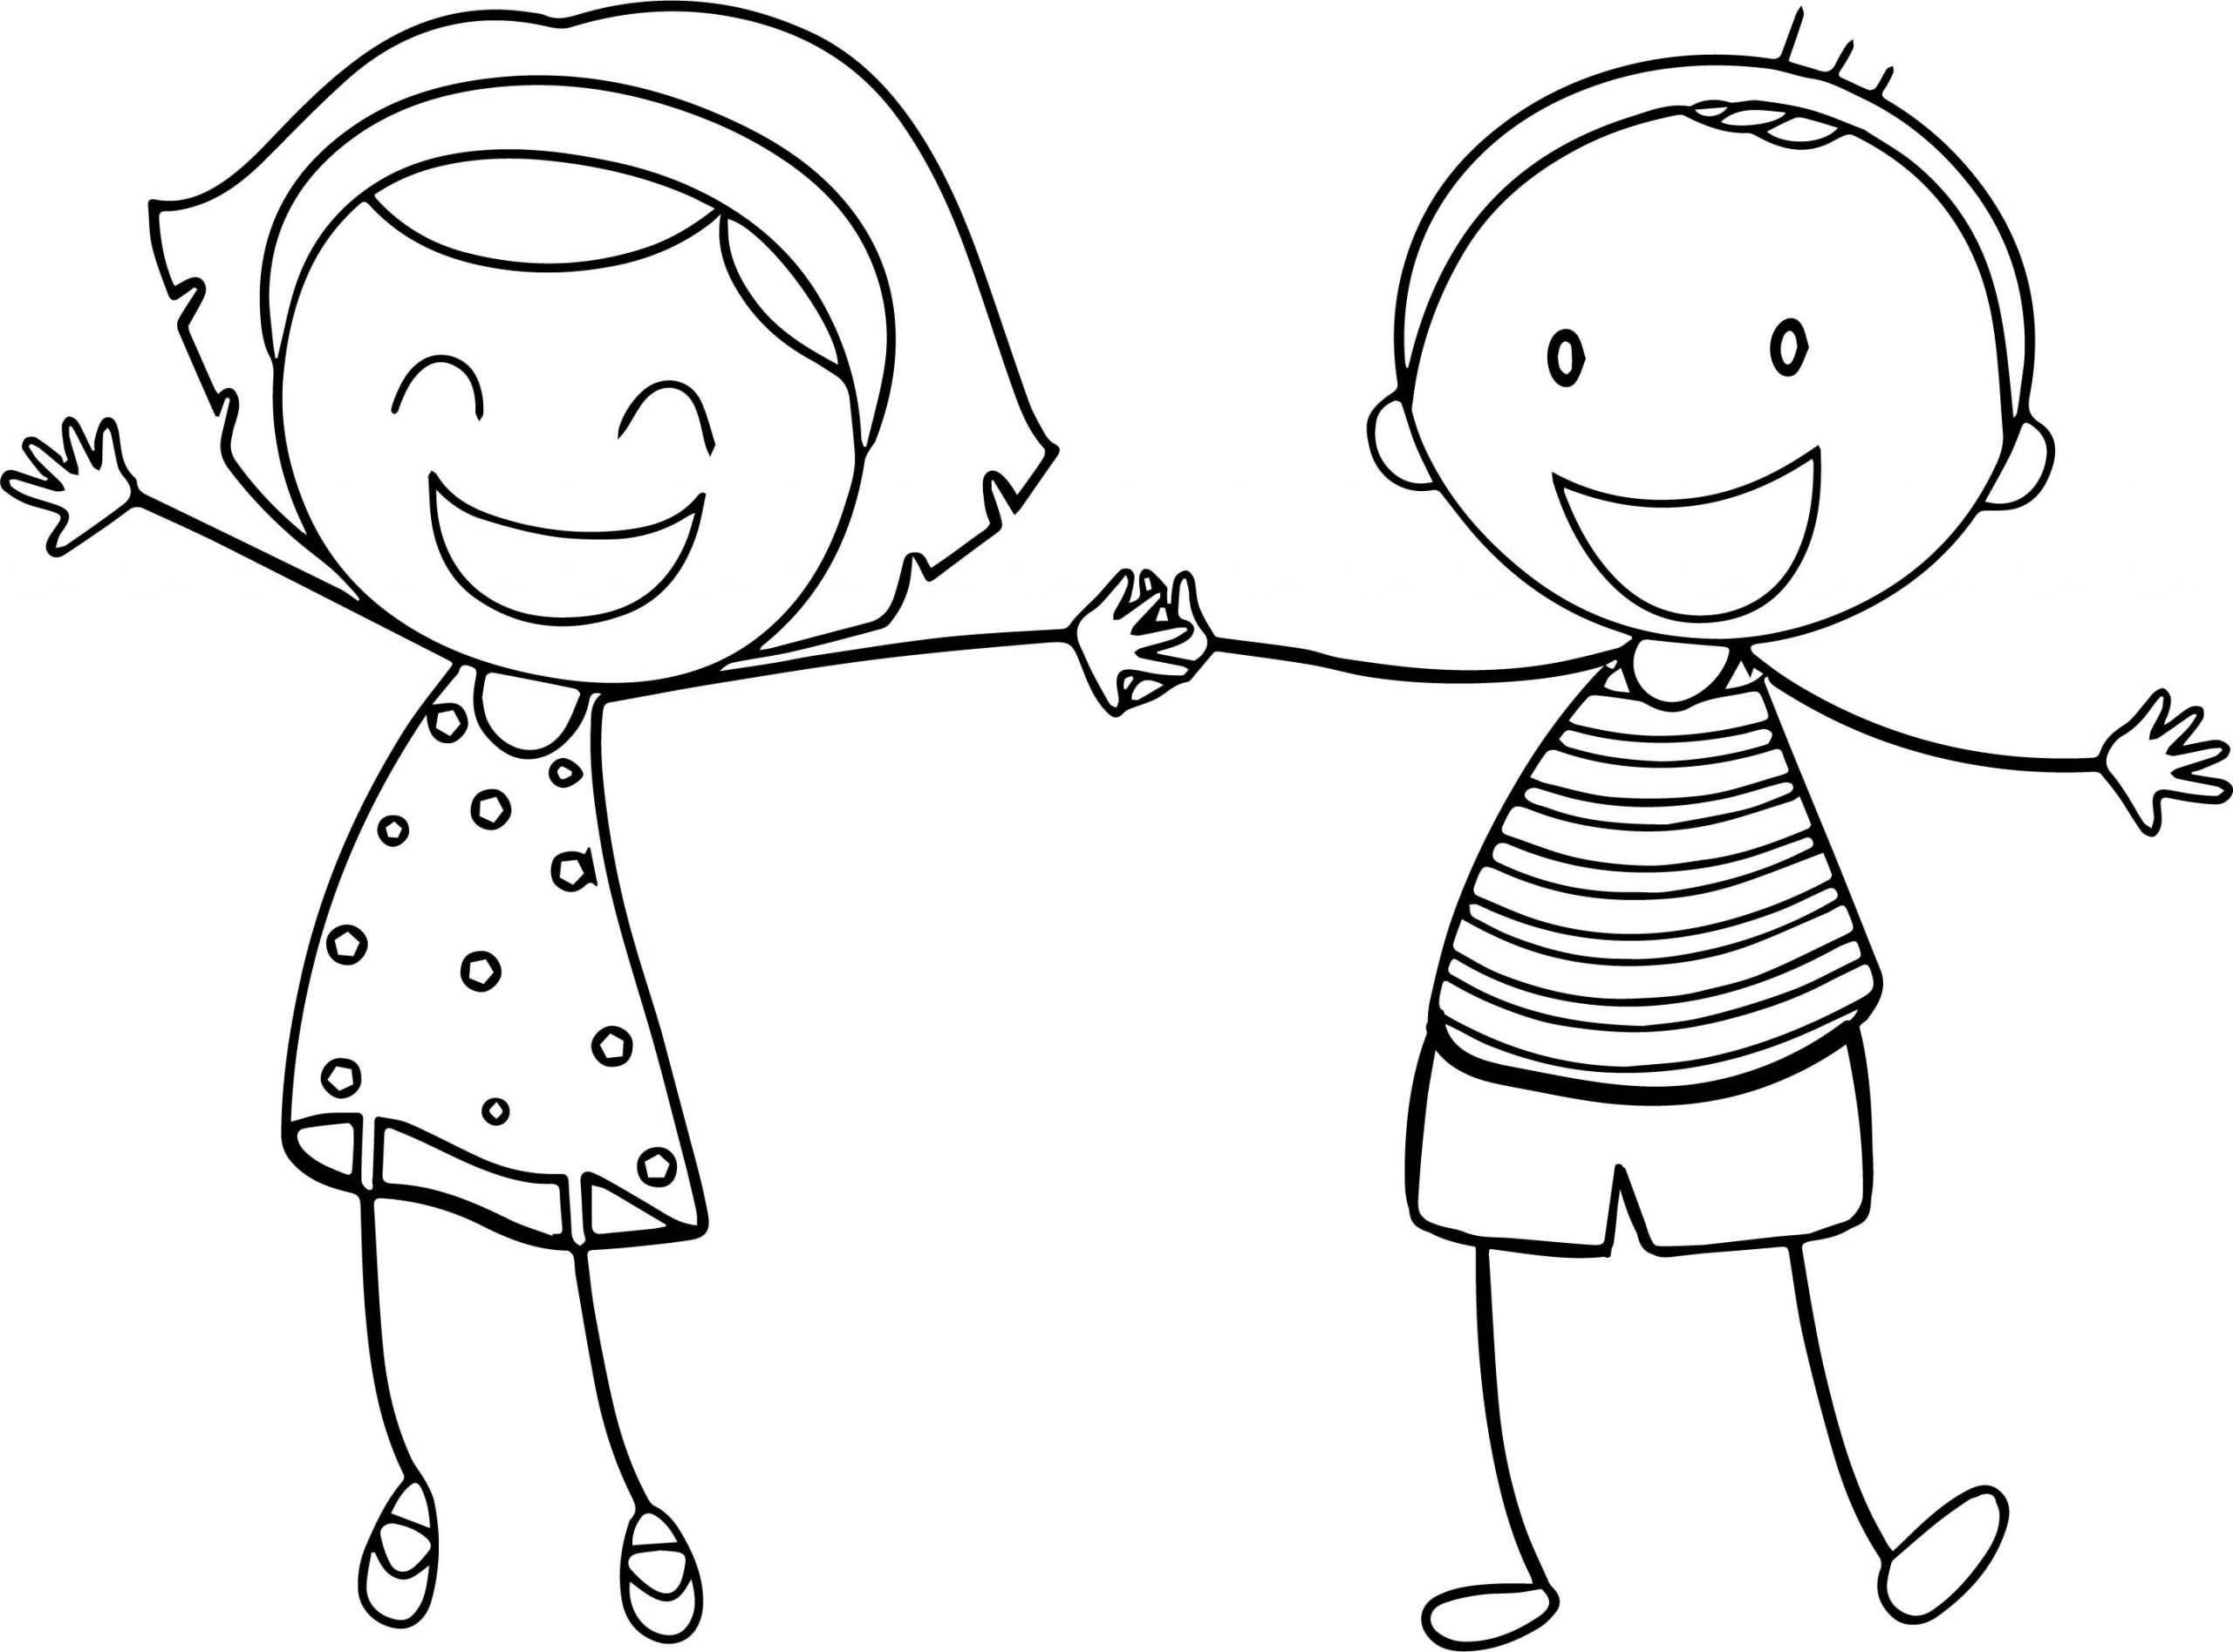 Coloring Pages For Girls And Boys
 Basic Funny Boy Girl Coloring Sheet Printable Free Pages